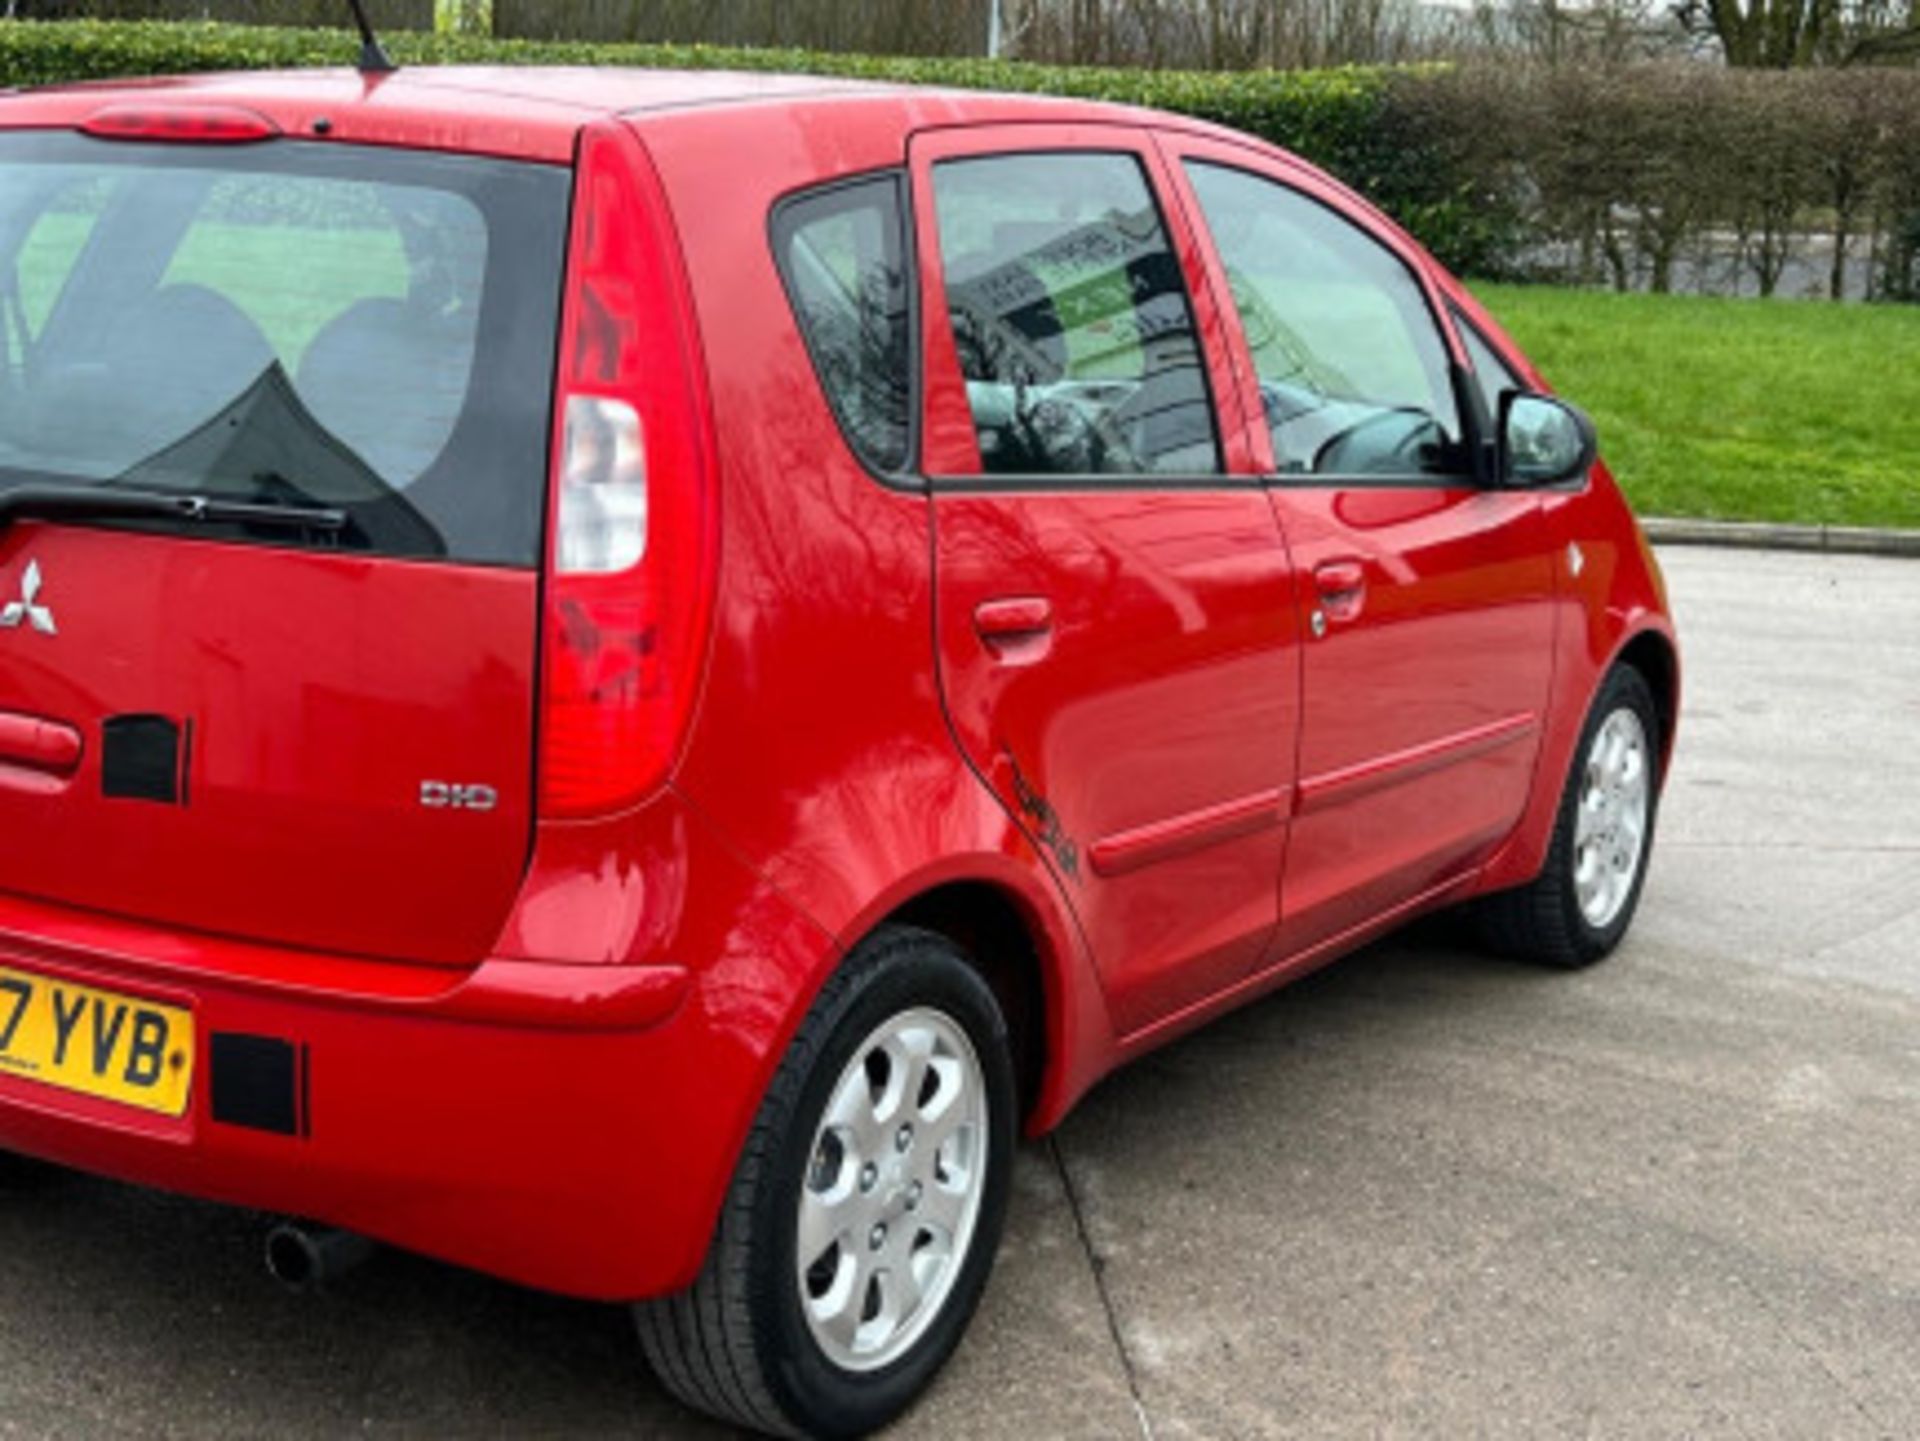 2007 MITSUBISHI COLT 1.5 DI-D DIESEL AUTOMATIC >>--NO VAT ON HAMMER--<< - Image 66 of 191